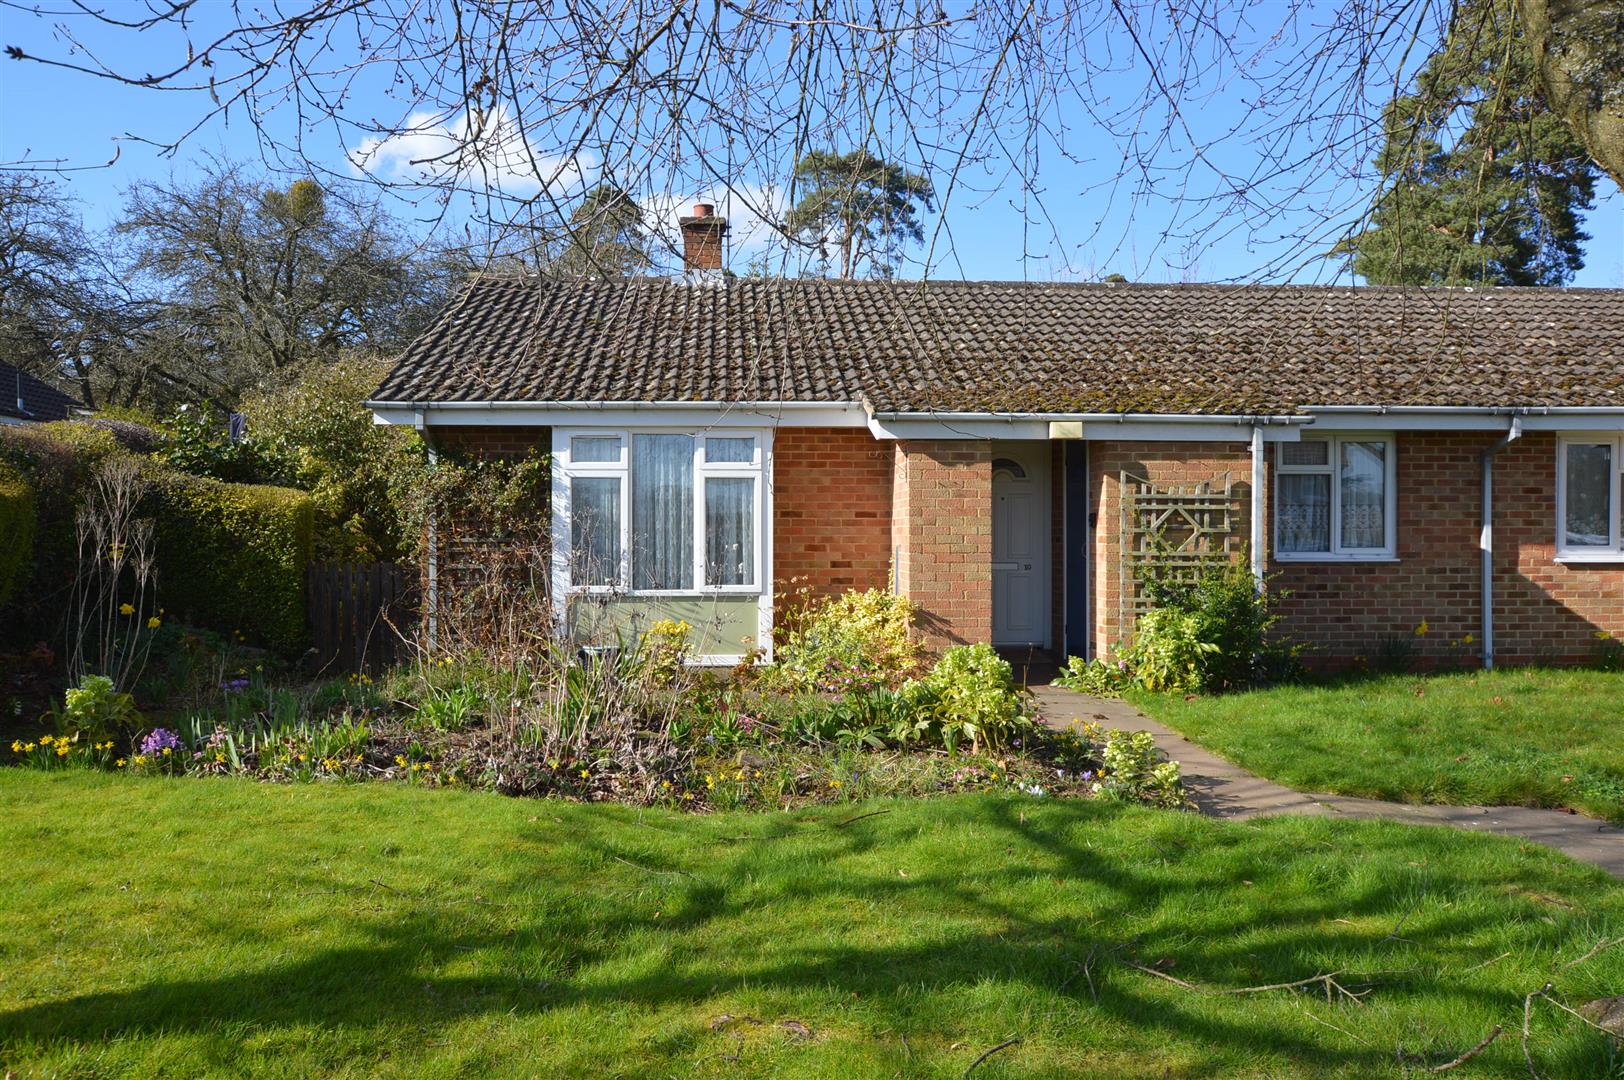 2 bed semi-detached bungalow for sale in Stoke Bliss, WR15